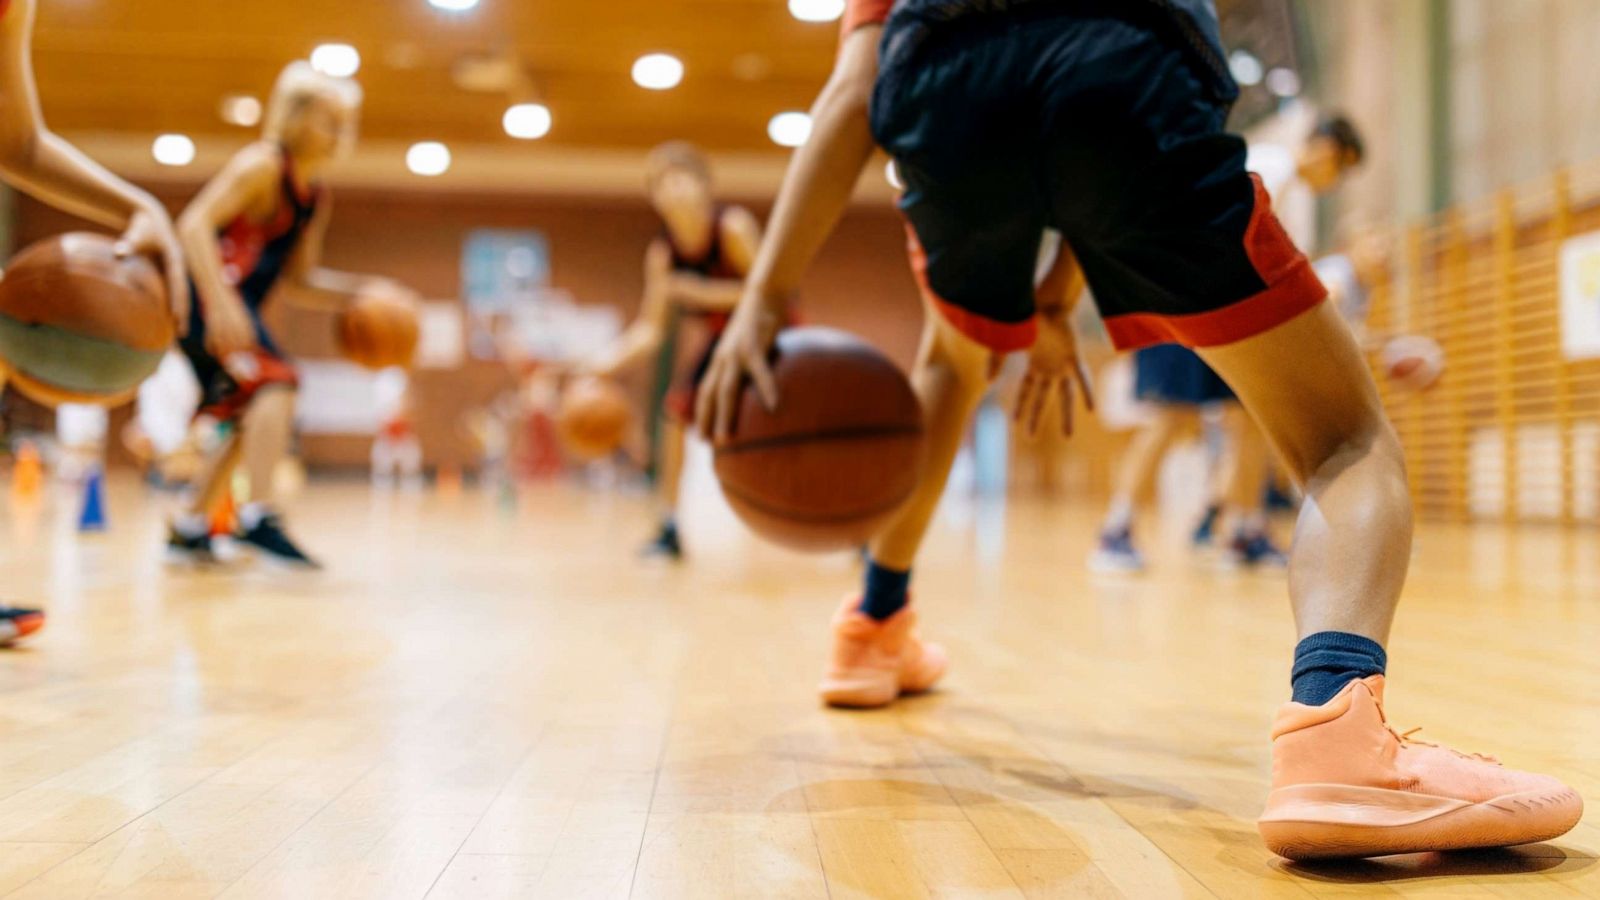 Sampling years and participation in basketball: teaching the